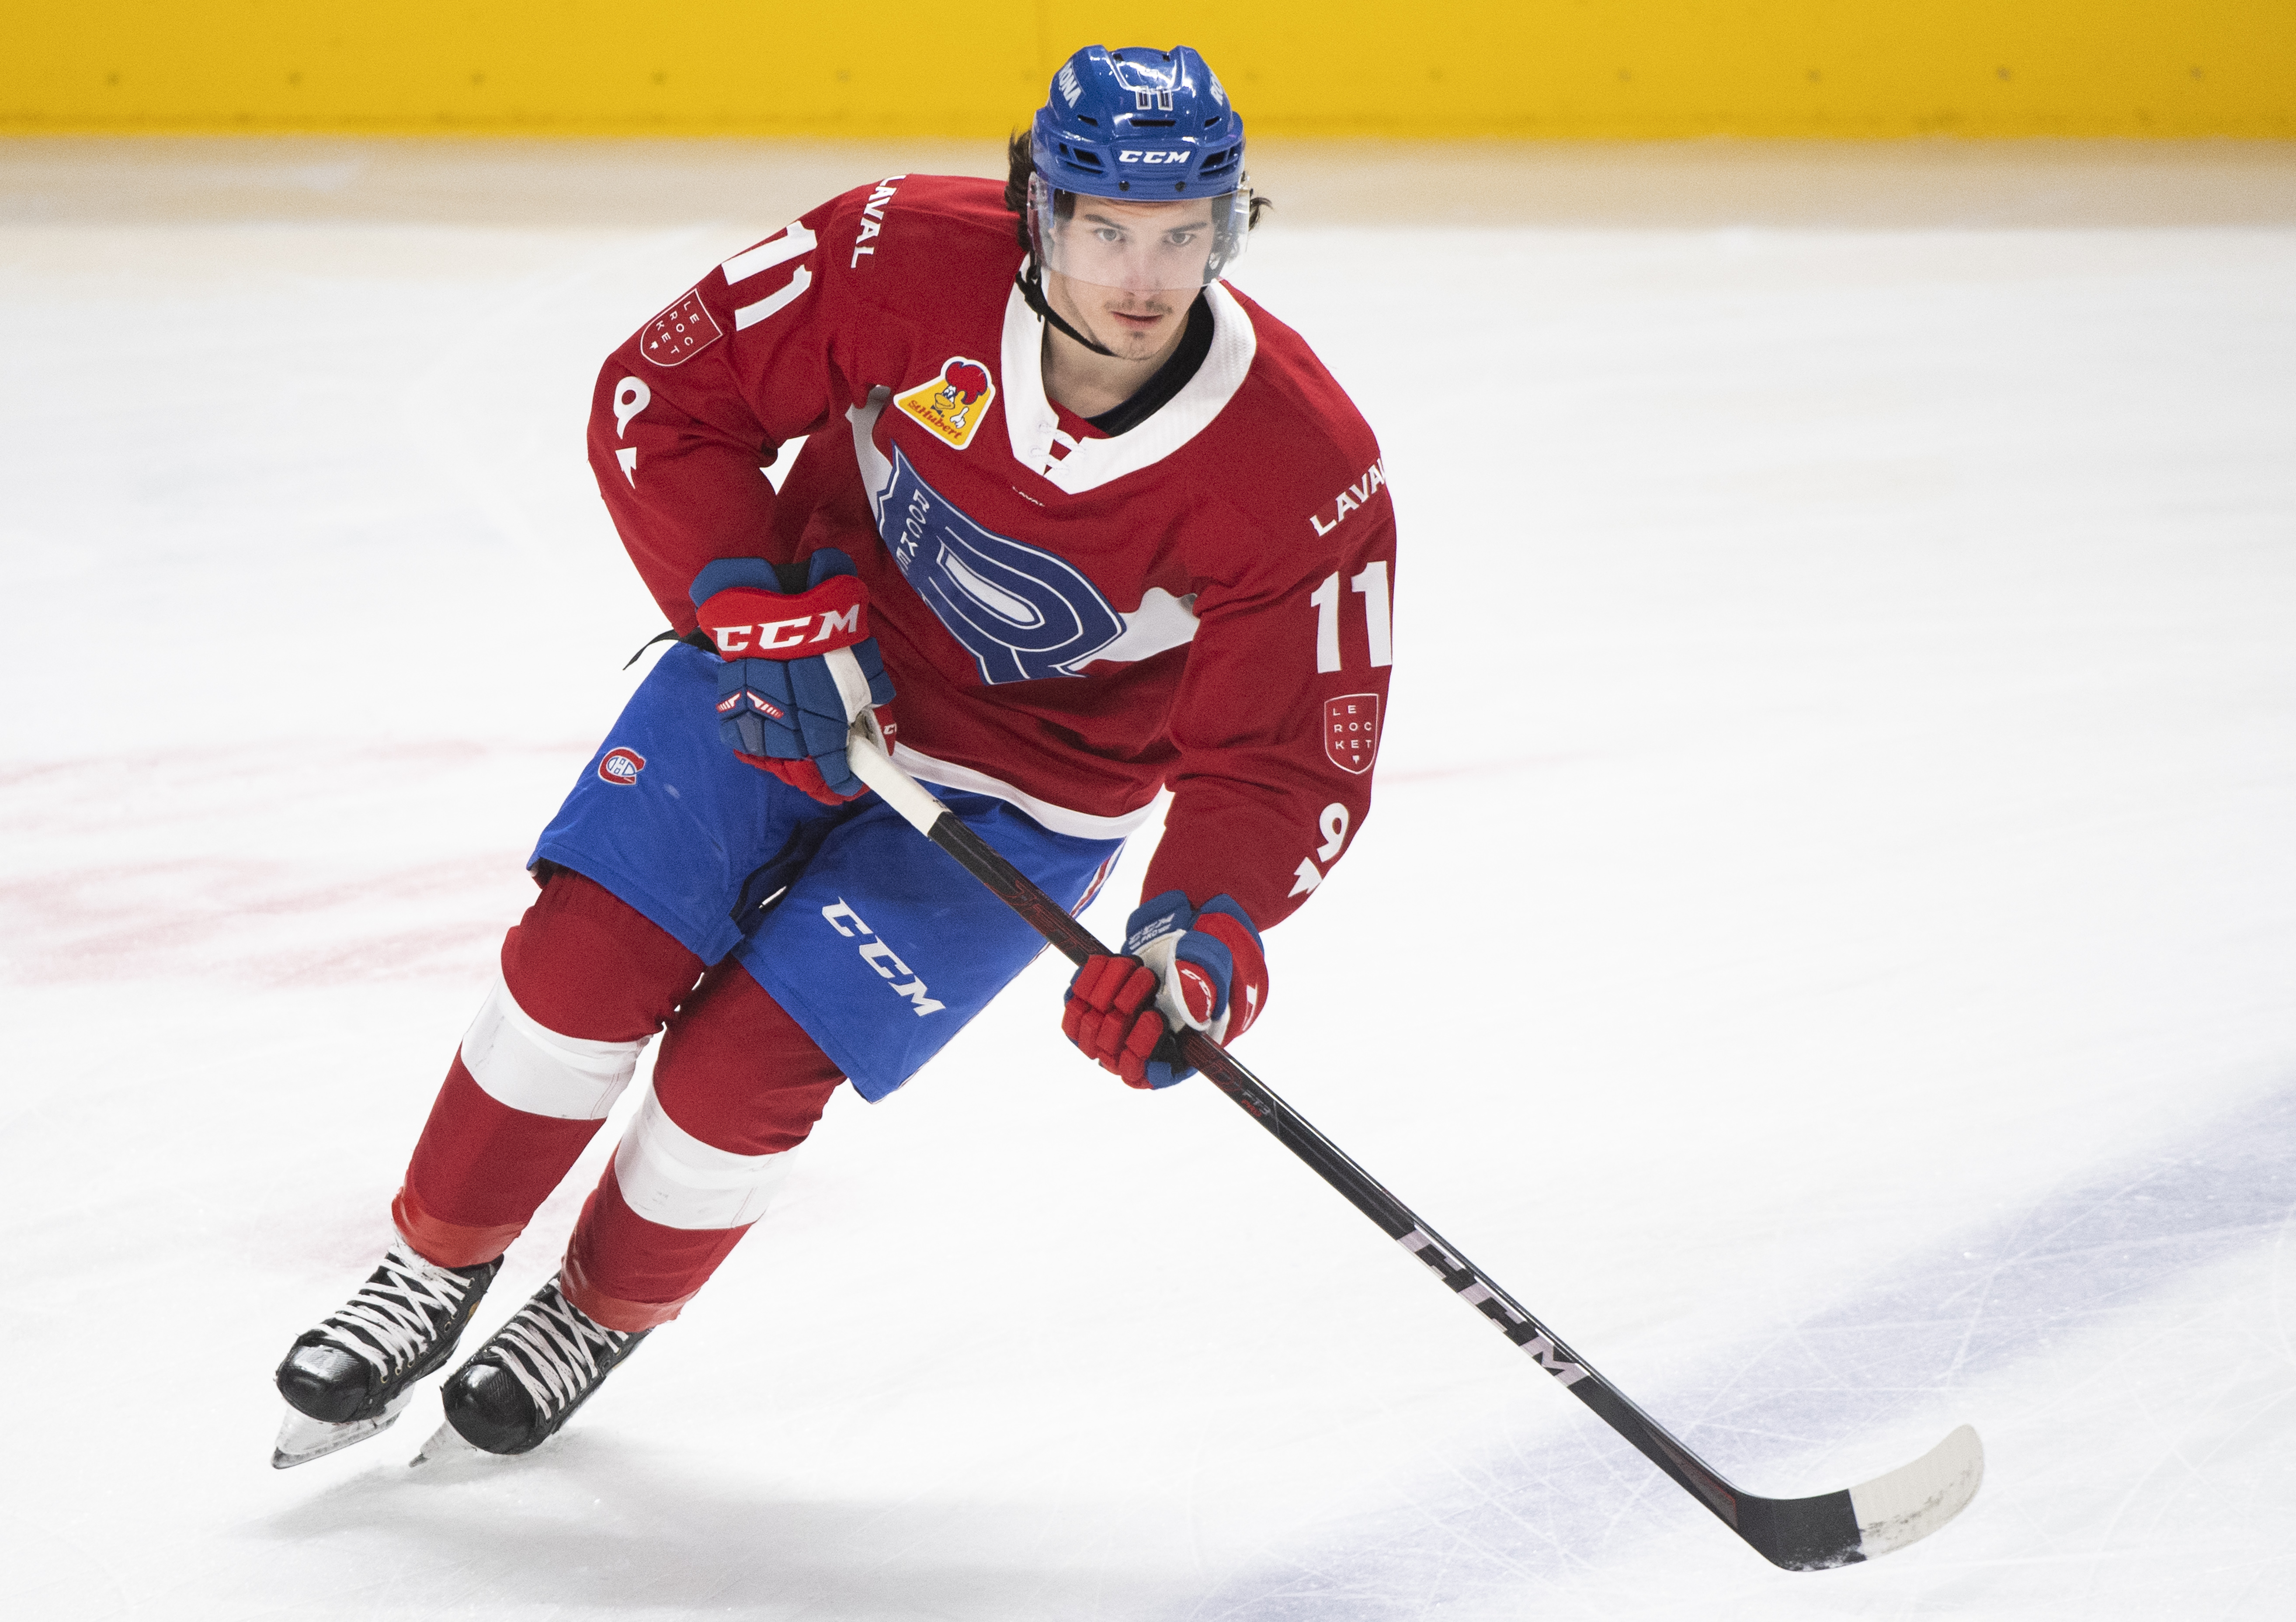 Harvey-Pinard's two goals can't help Canadiens snap retro jersey